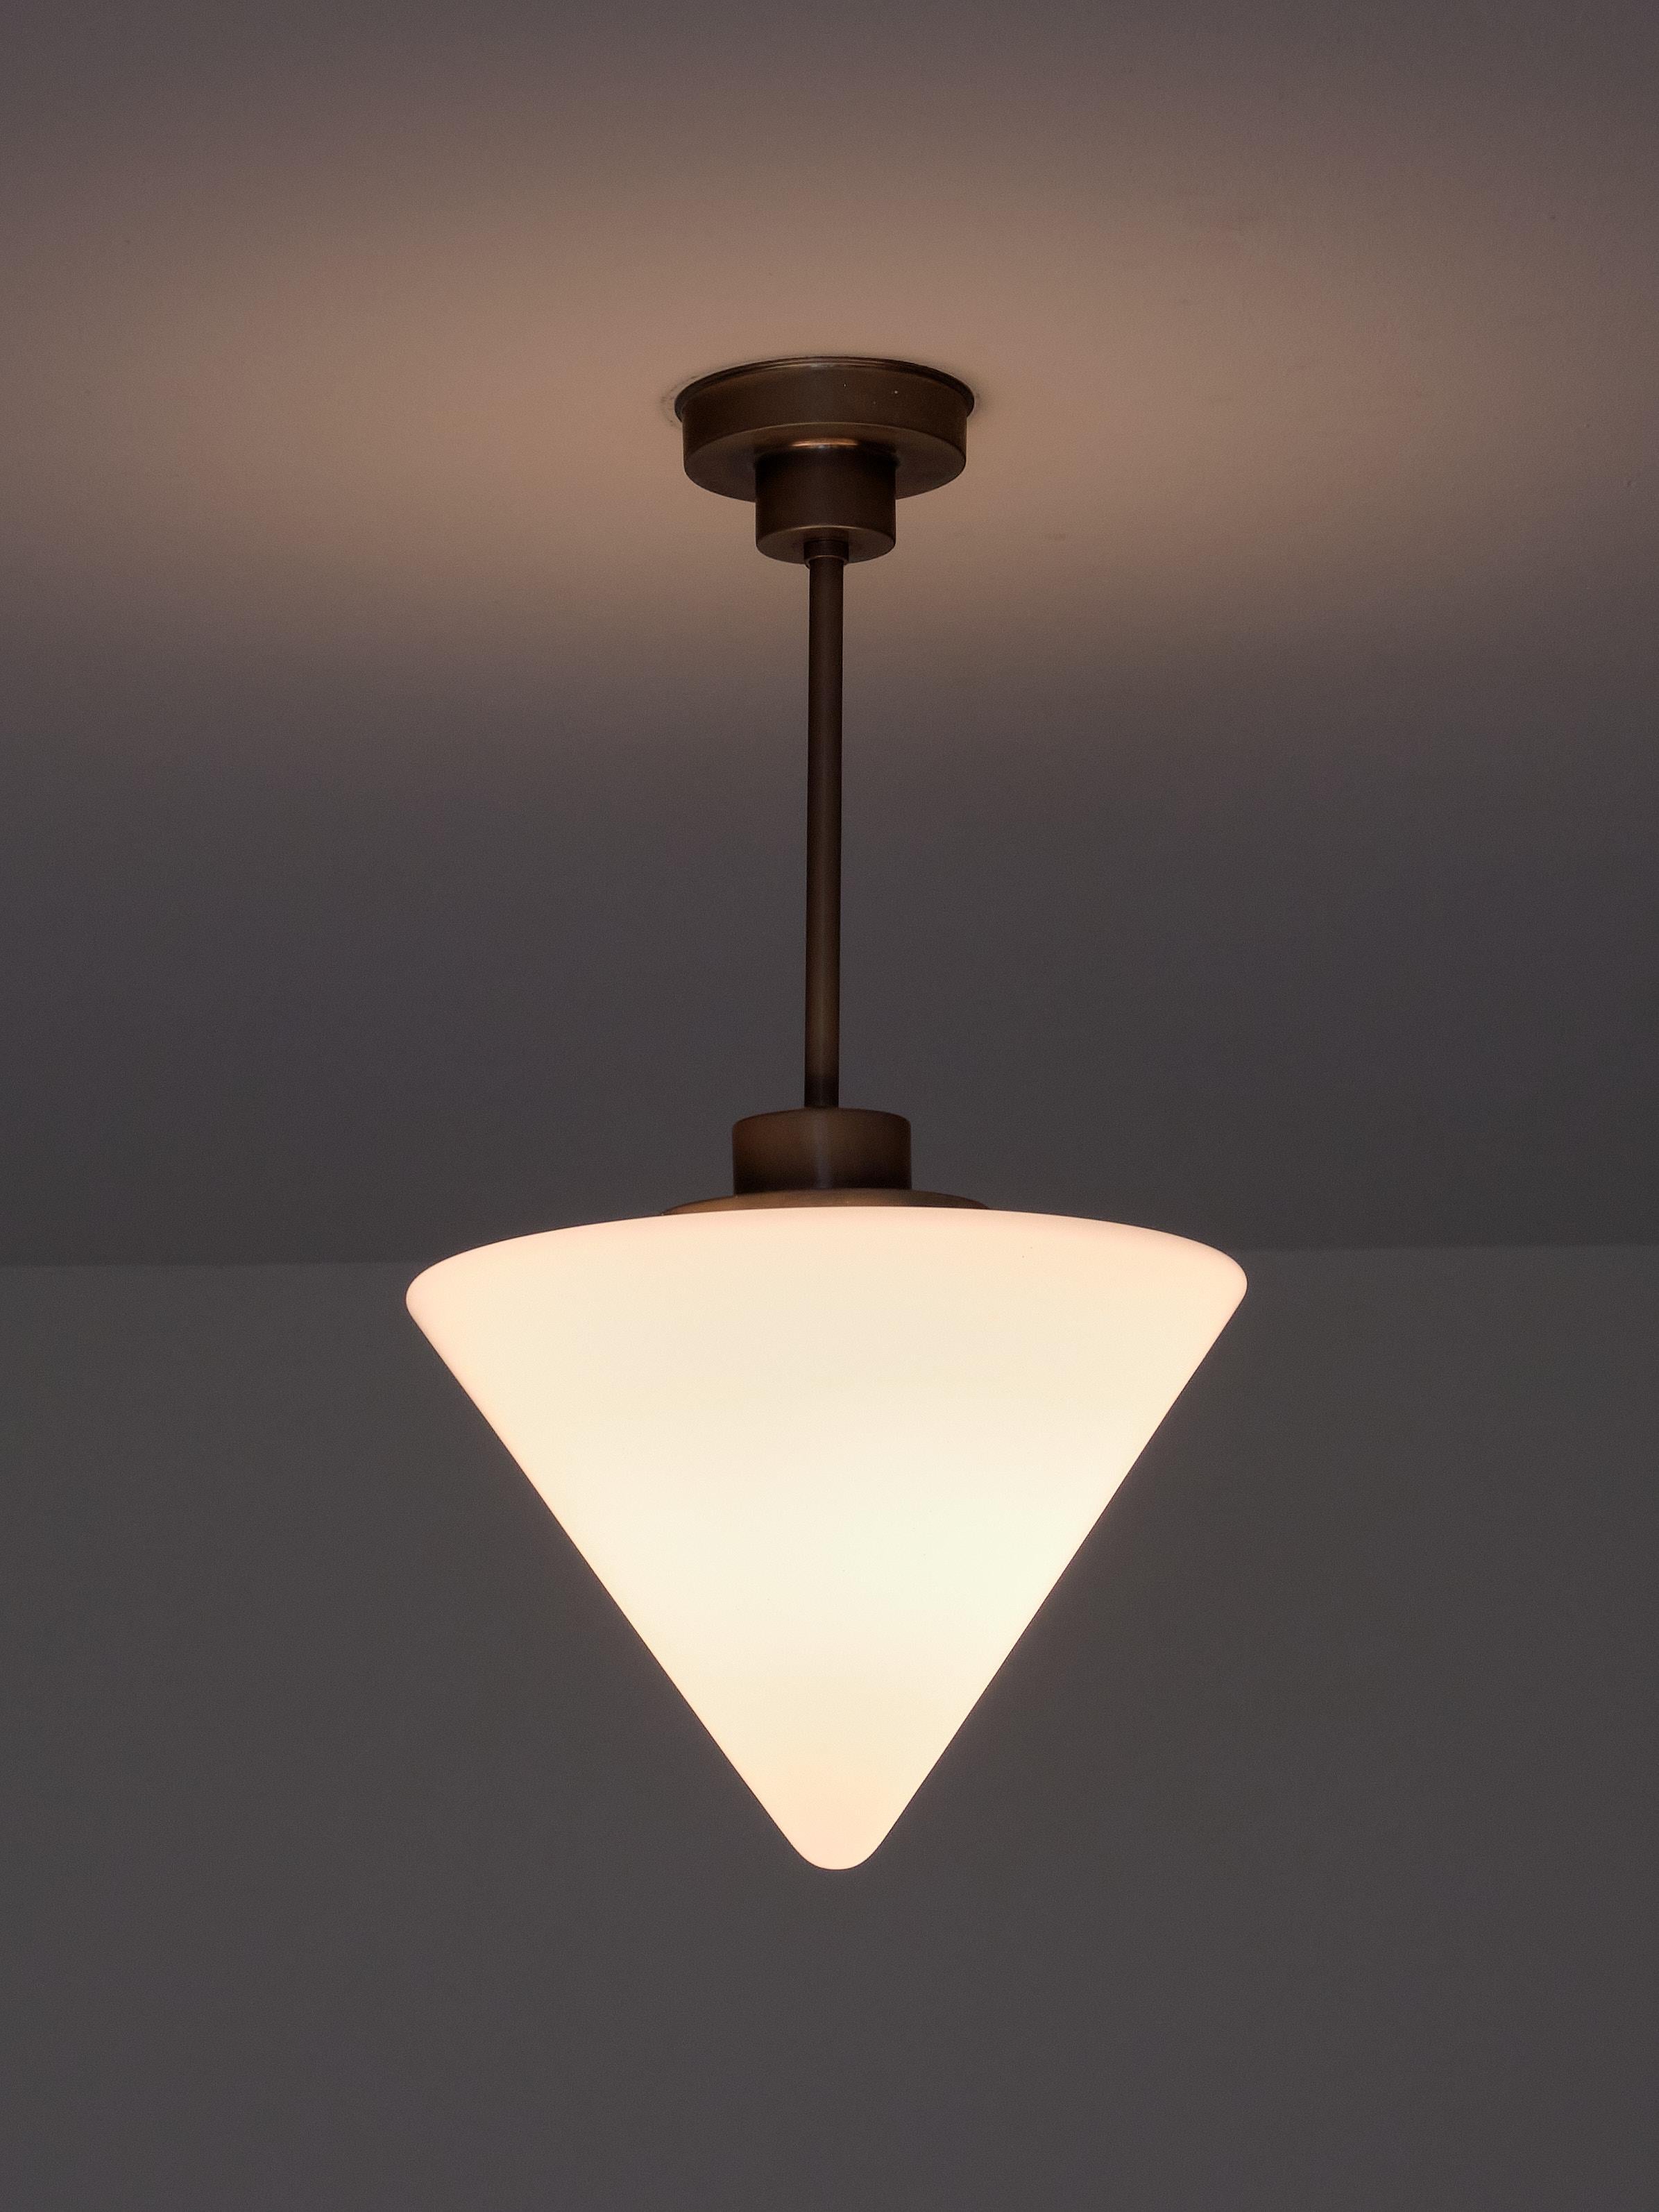 Opaline Glass Gispen Cone Shaped Pendant Light in Opal Glass and Nickel, Netherlands, 1930s For Sale